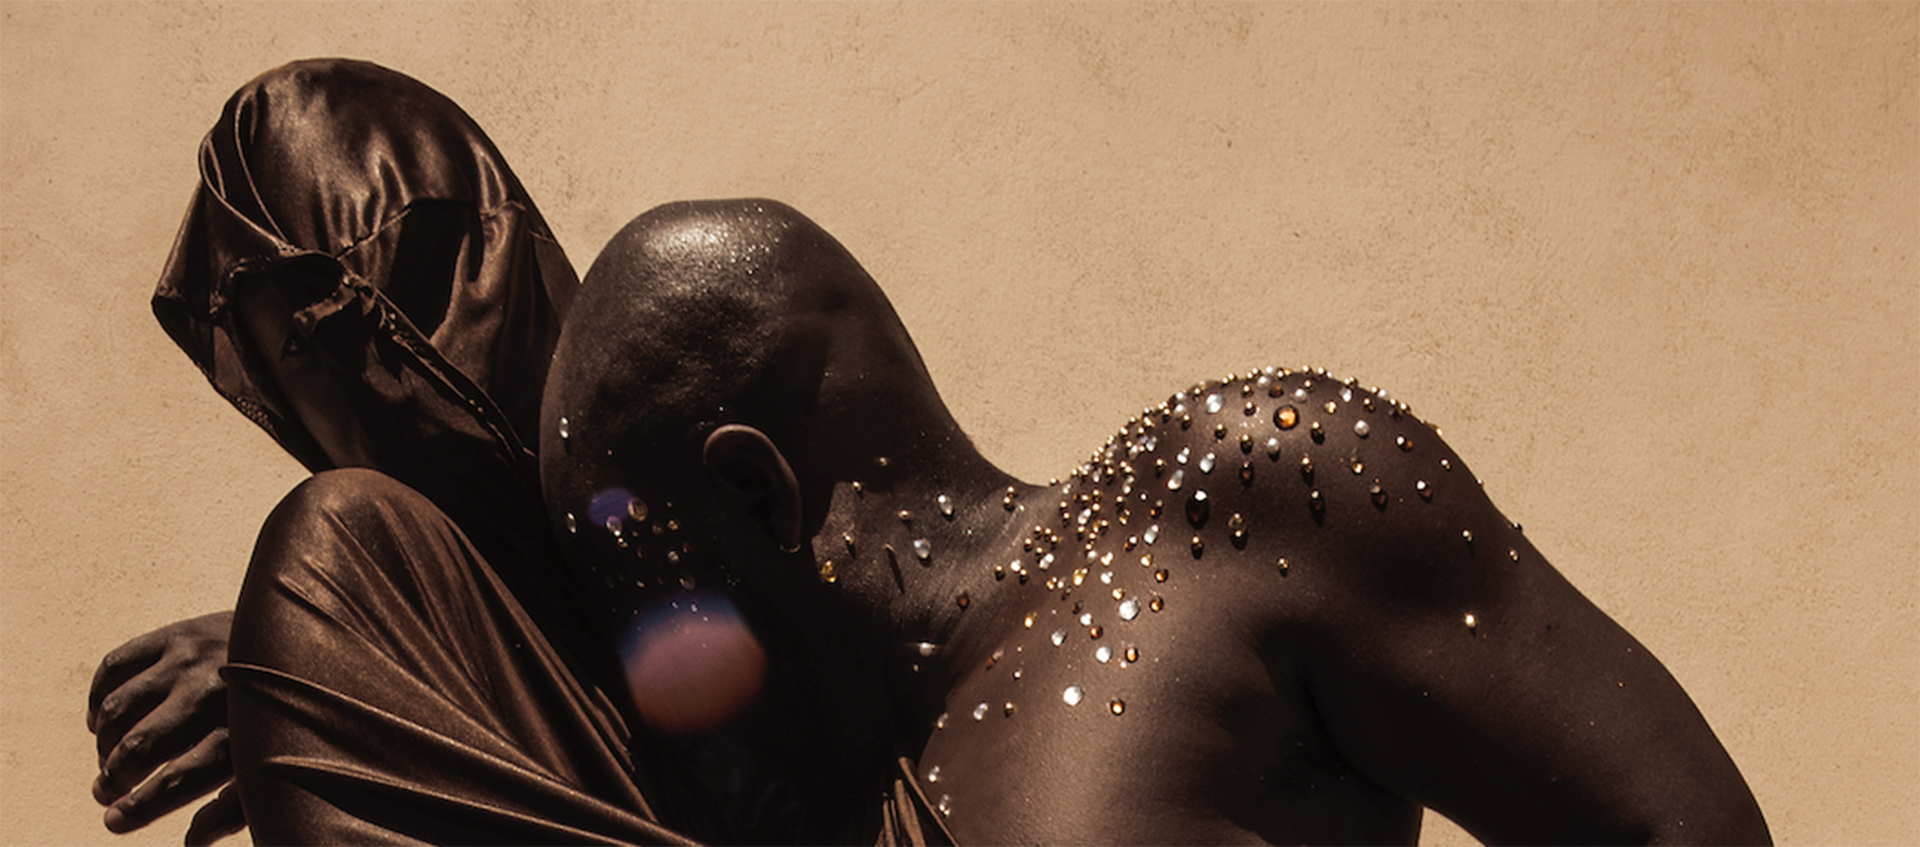 Nile Harris (left) and jaamil olawale kosoko (right) embracing one another. Harris’s face and body are covered with shimmery brown fabric. kosoko—who has dark brown skin and silver, gold, and brown gems on their bare shoulder, neck, and chest—is leaning their bare head on Harris’s chest.